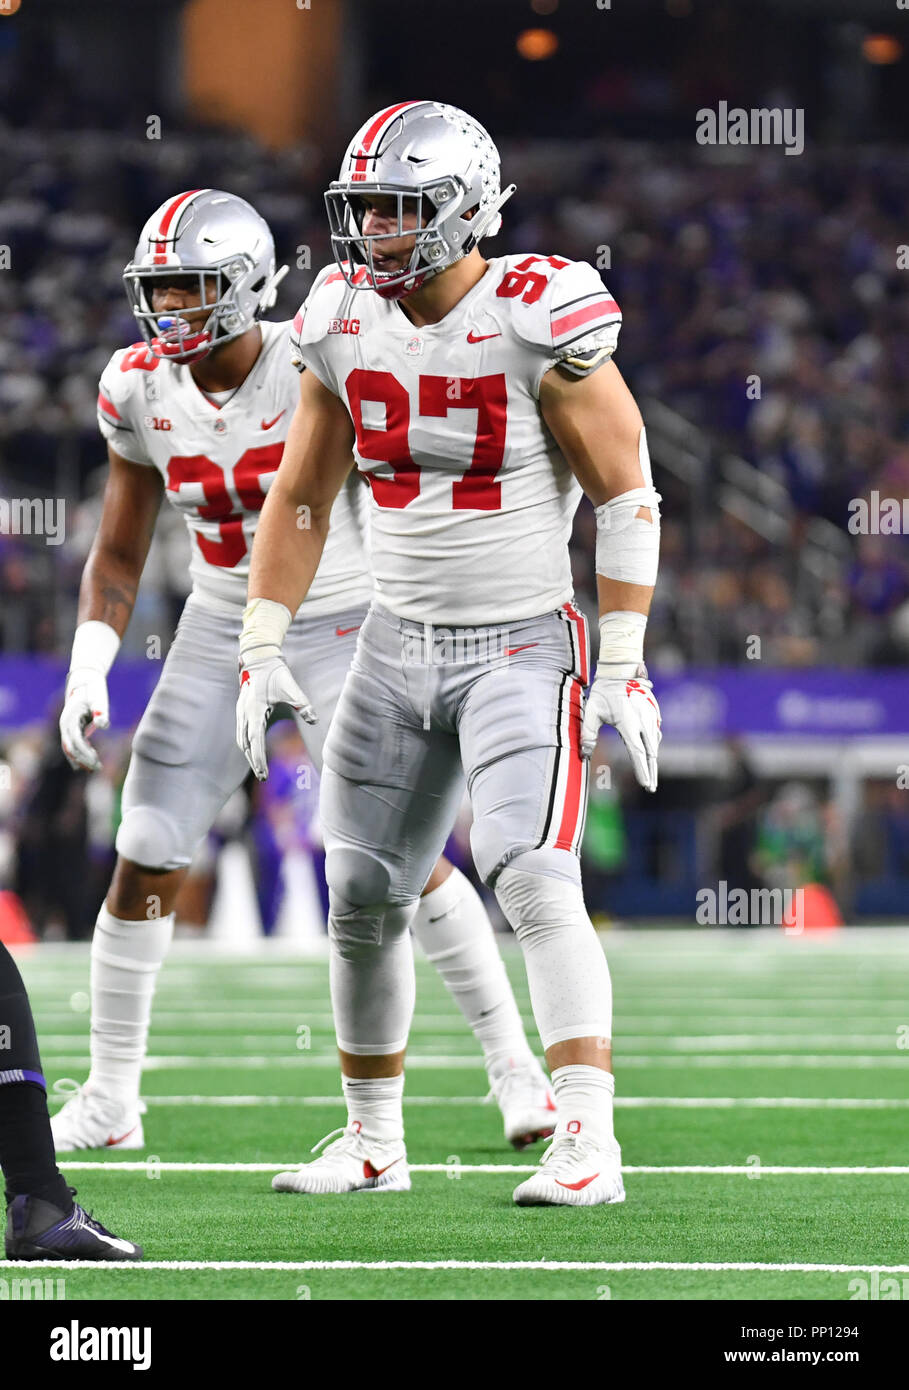 Taking stock of Ohio State's Nick Bosa and playing similarities to